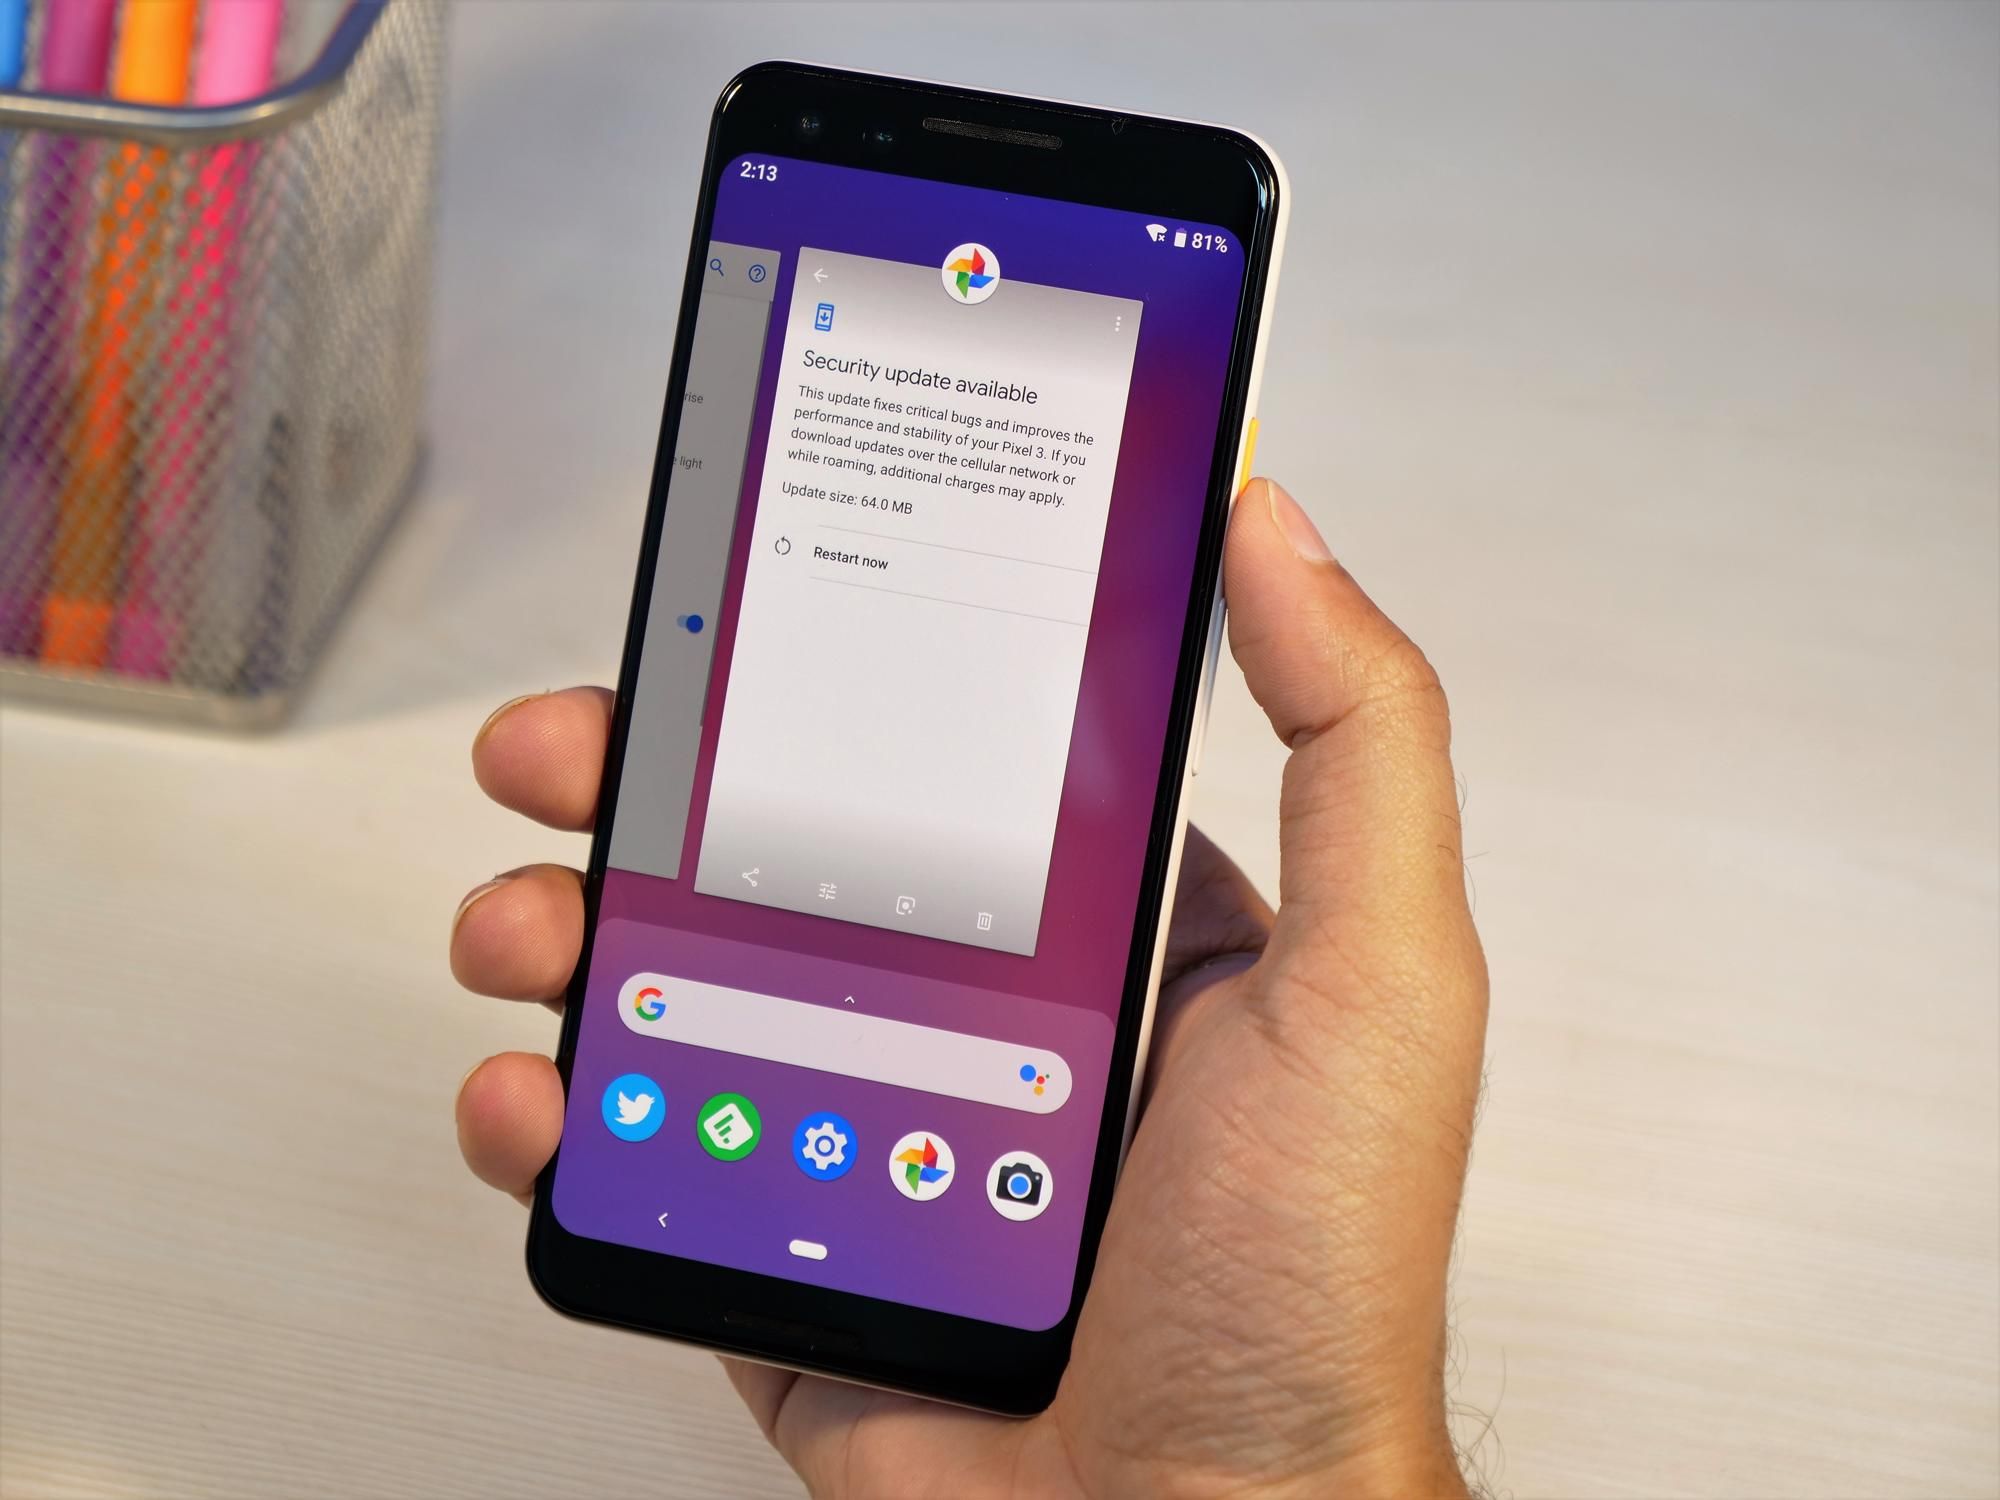 Pixel 3 review: The best Android phone of 2018 - CNET